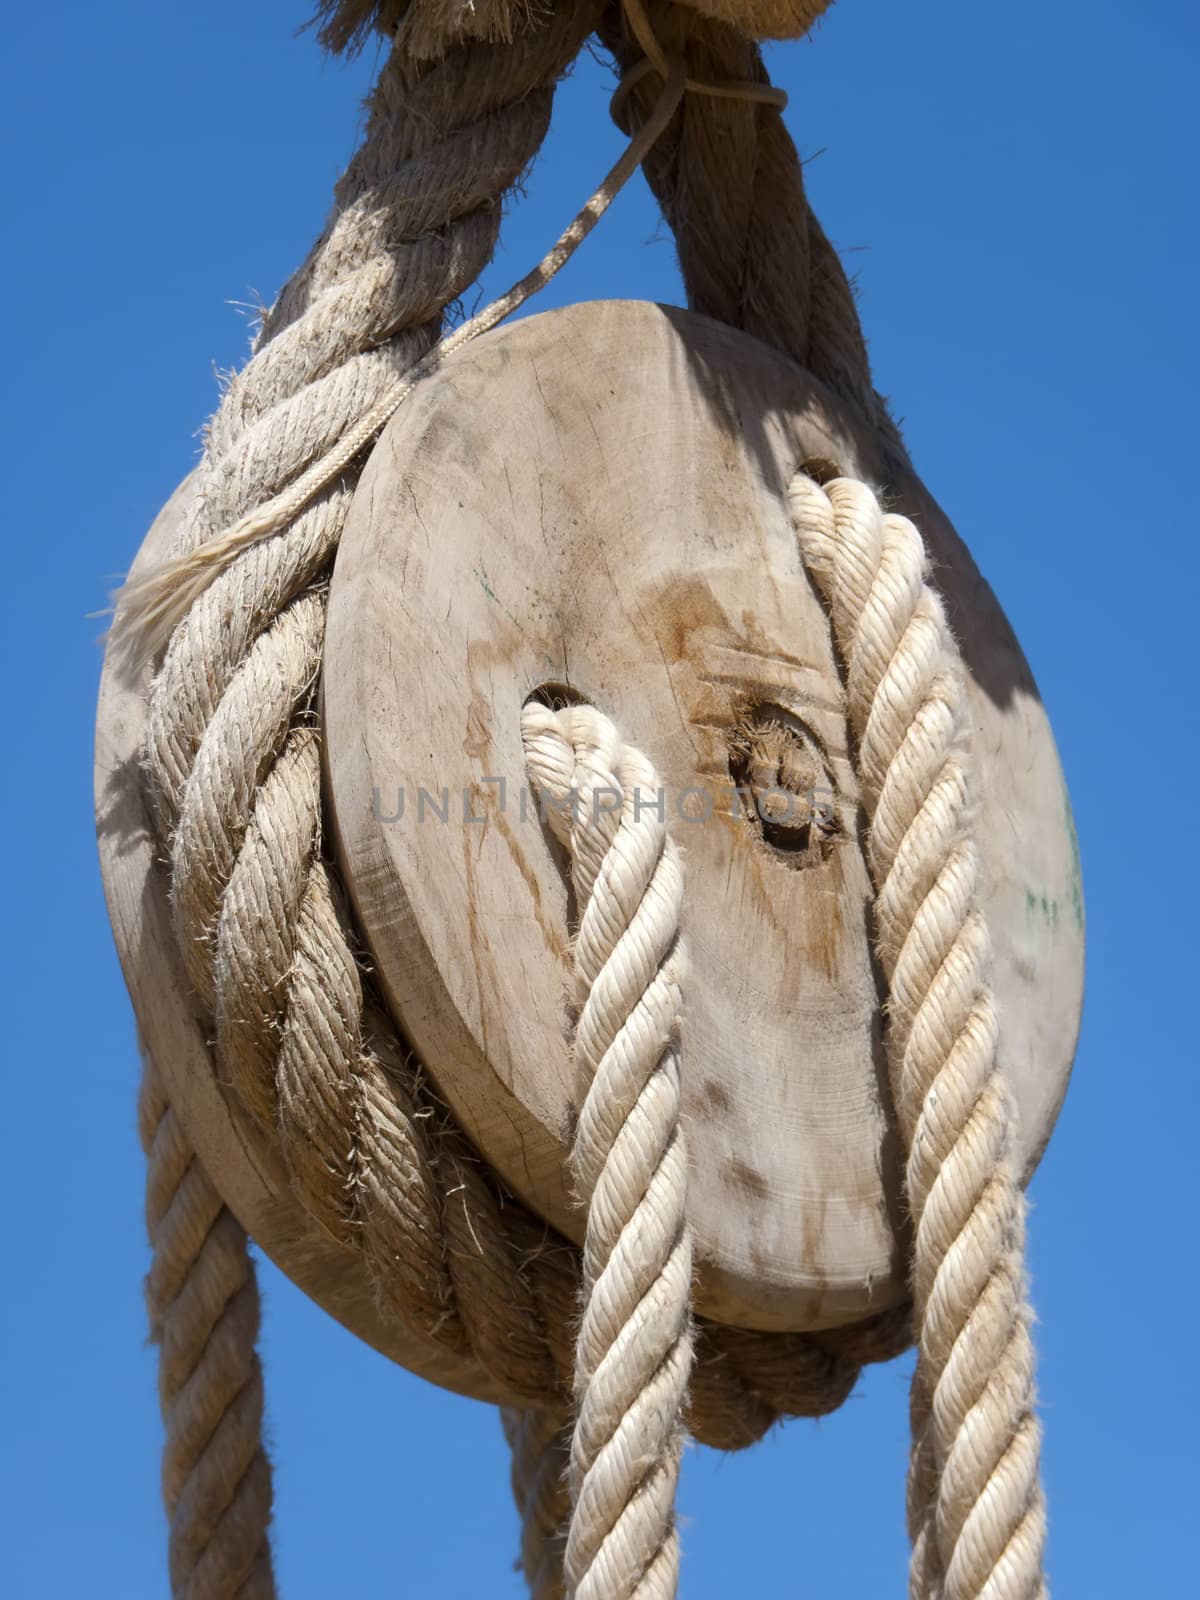 the pulley and rope by njaj